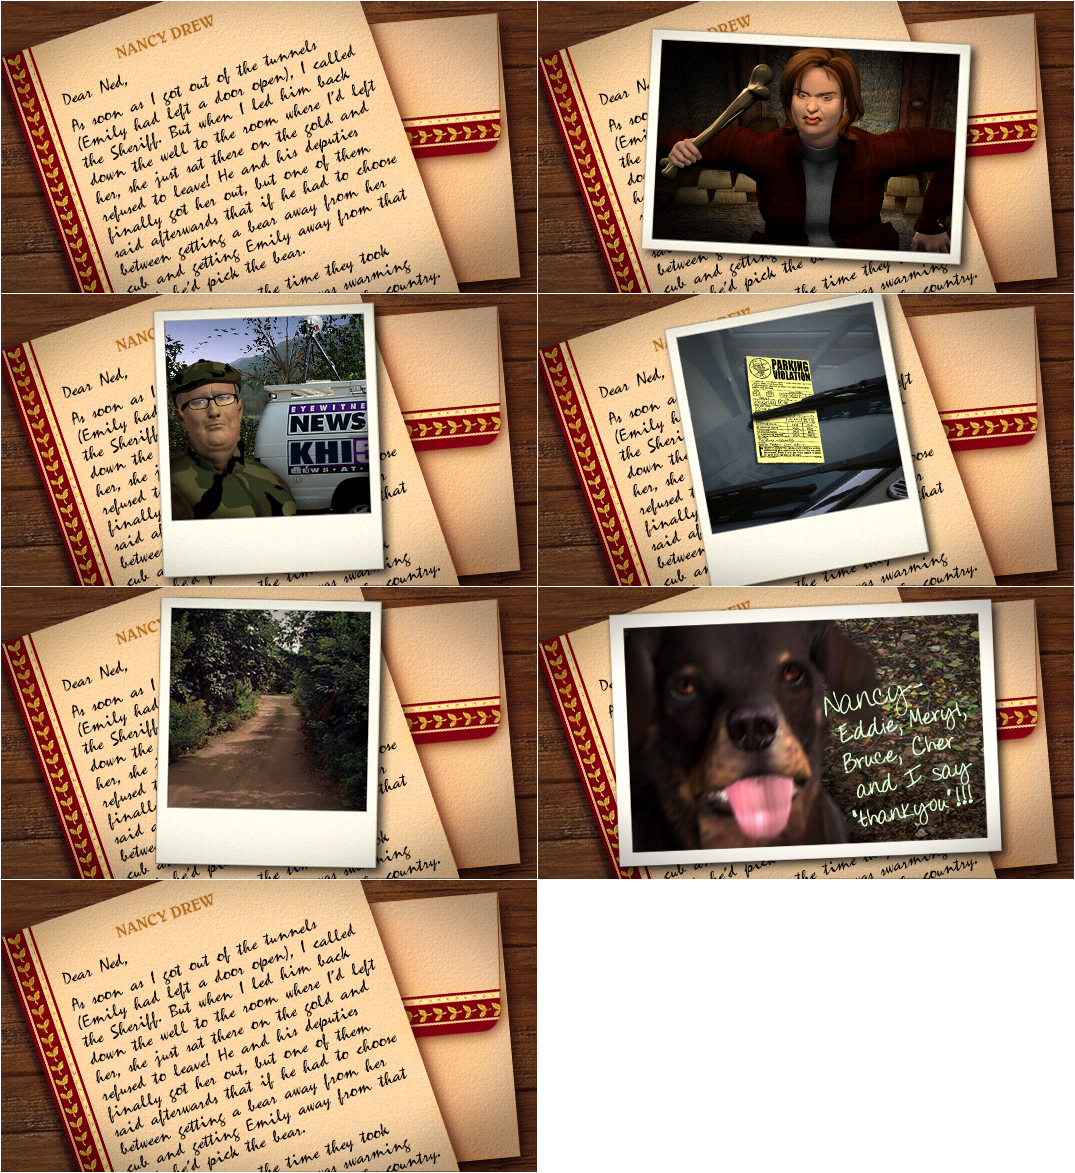 Nancy Drew: Ghost Dogs of Moon Lake - Closing Letter